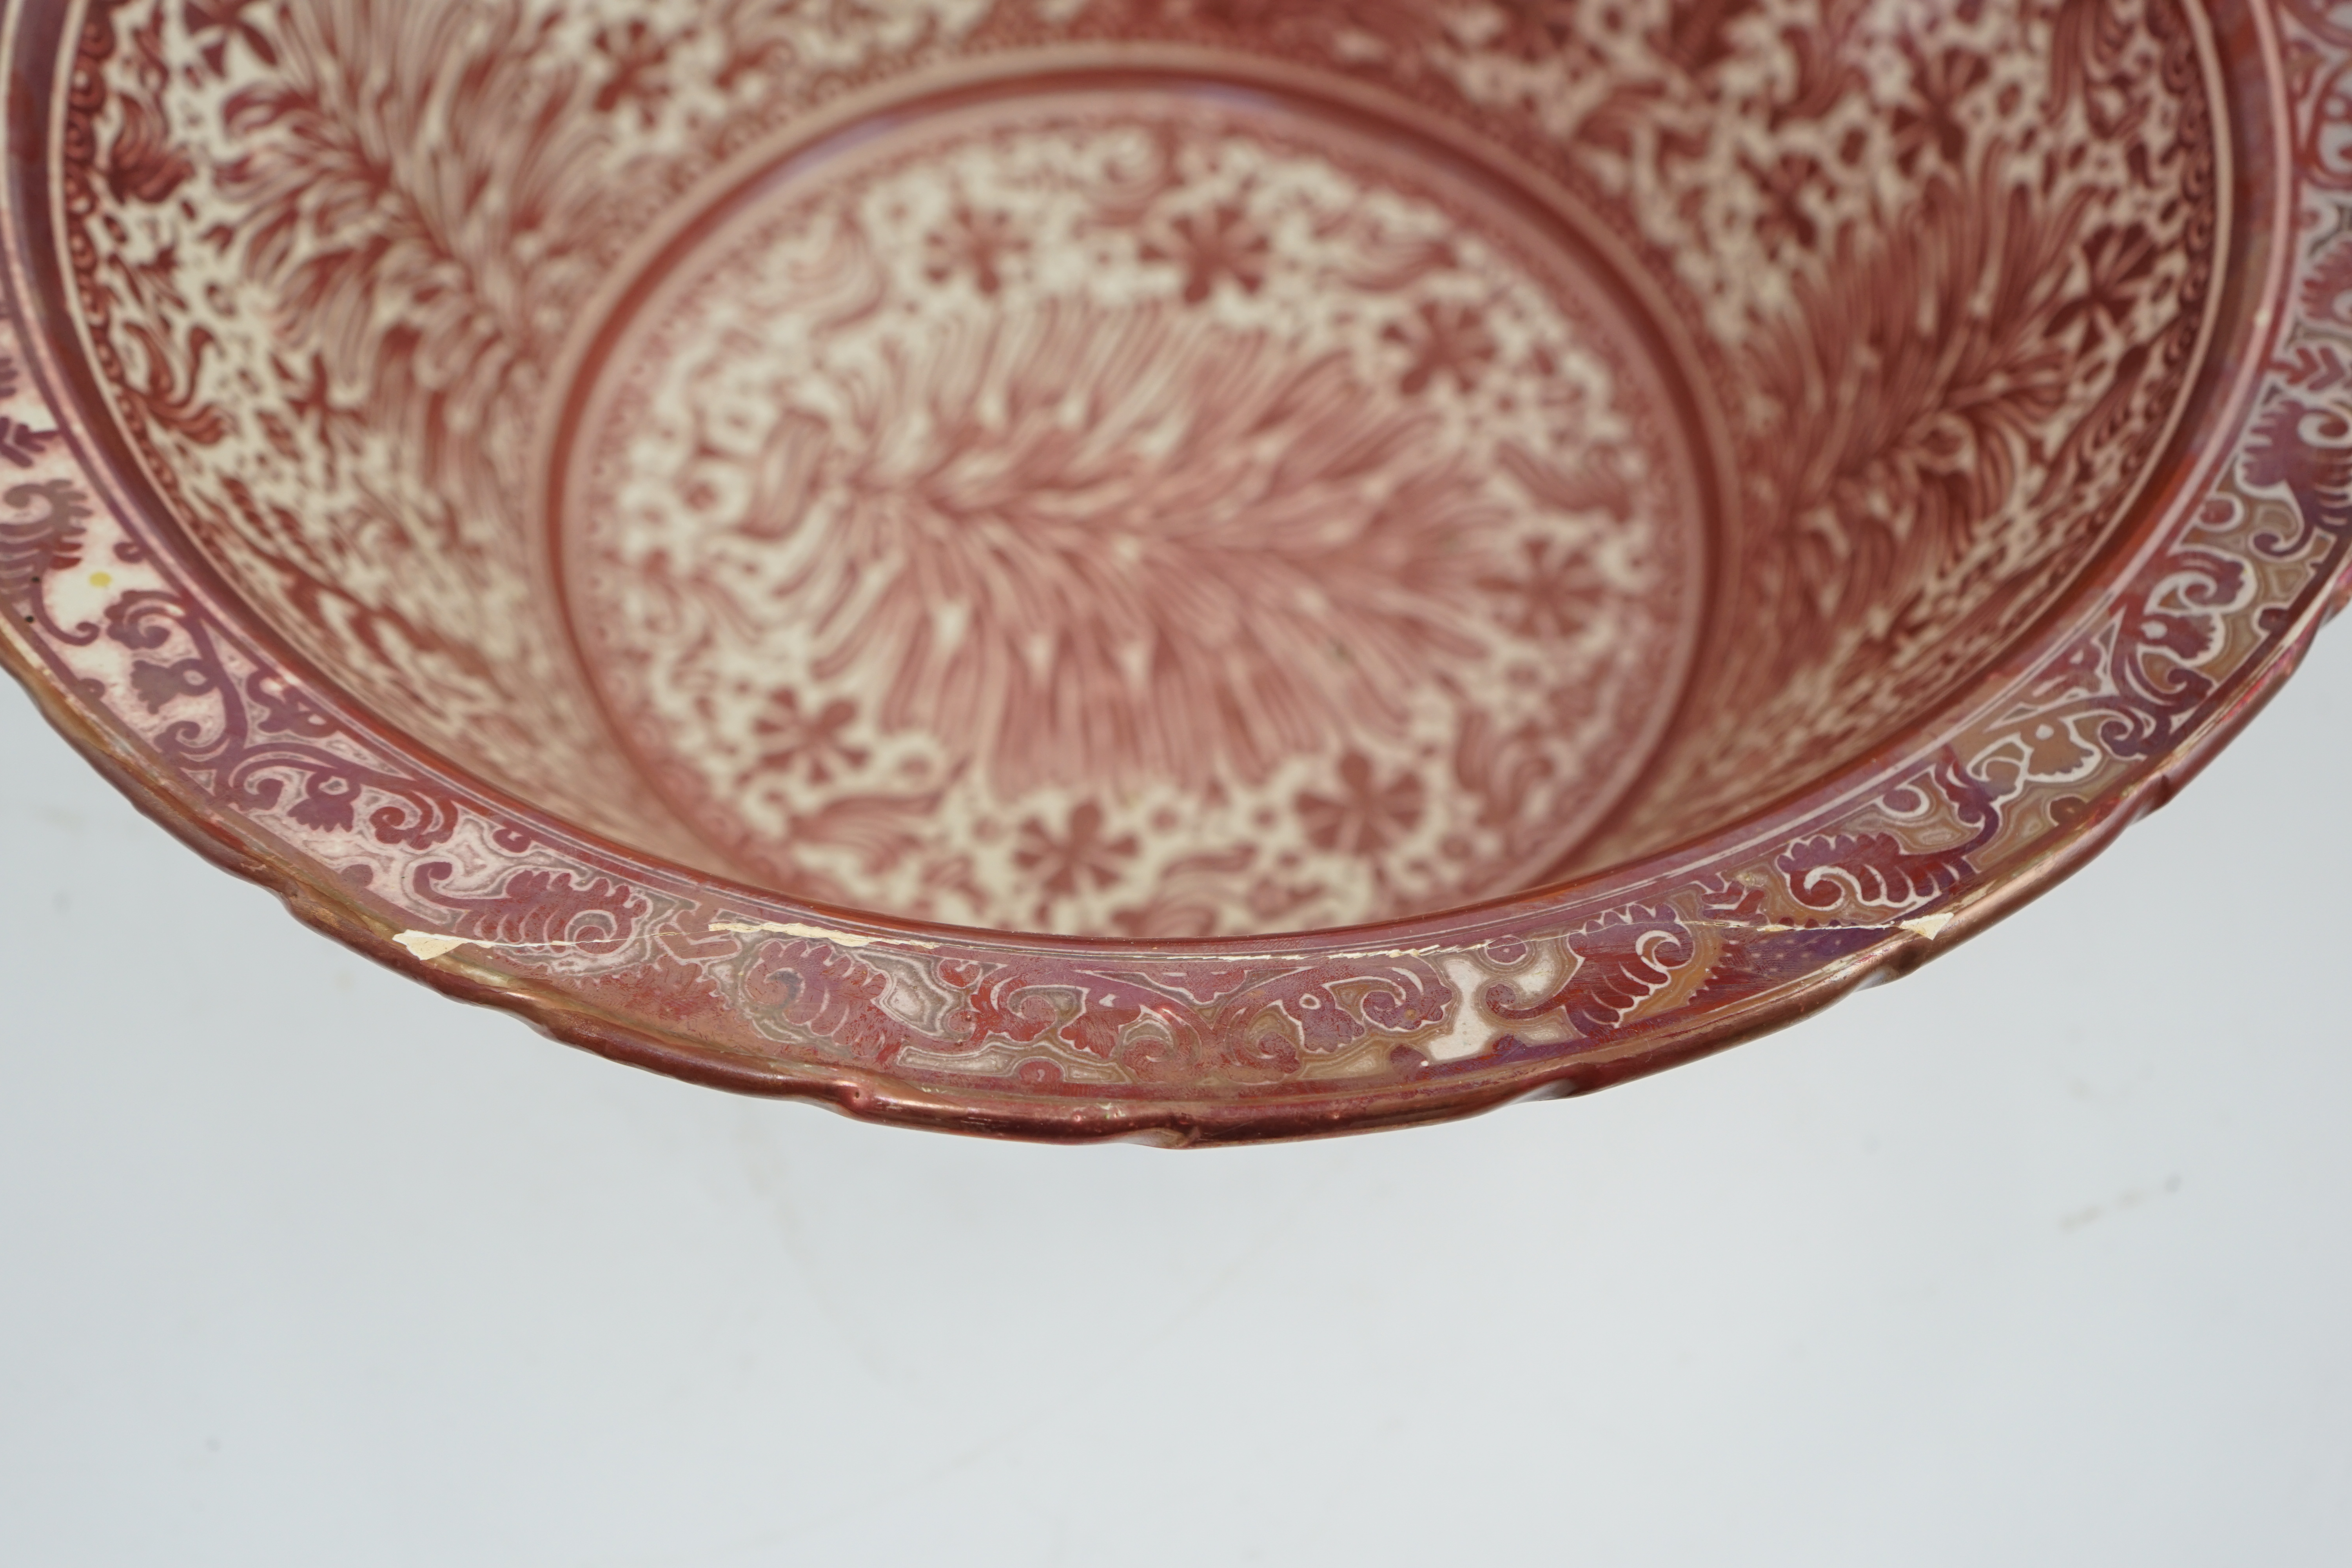 Ulisse Cantagalli, a large Hispano-Moresque style ruby-copper lustre basin, c.1900, some restoration